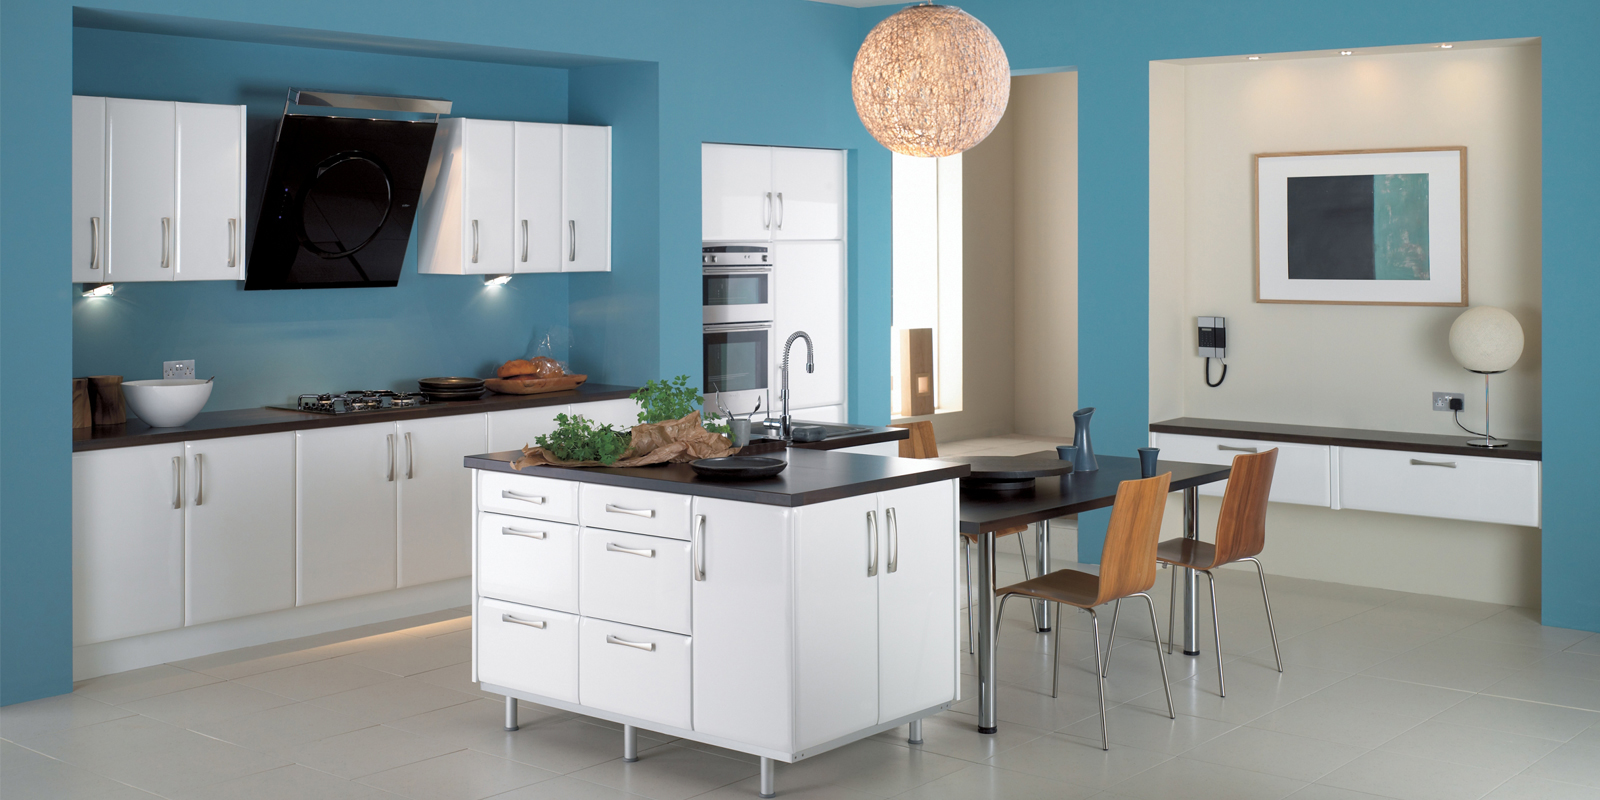 Know About Modular Kitchen To Design Your Kitchen Beautifully